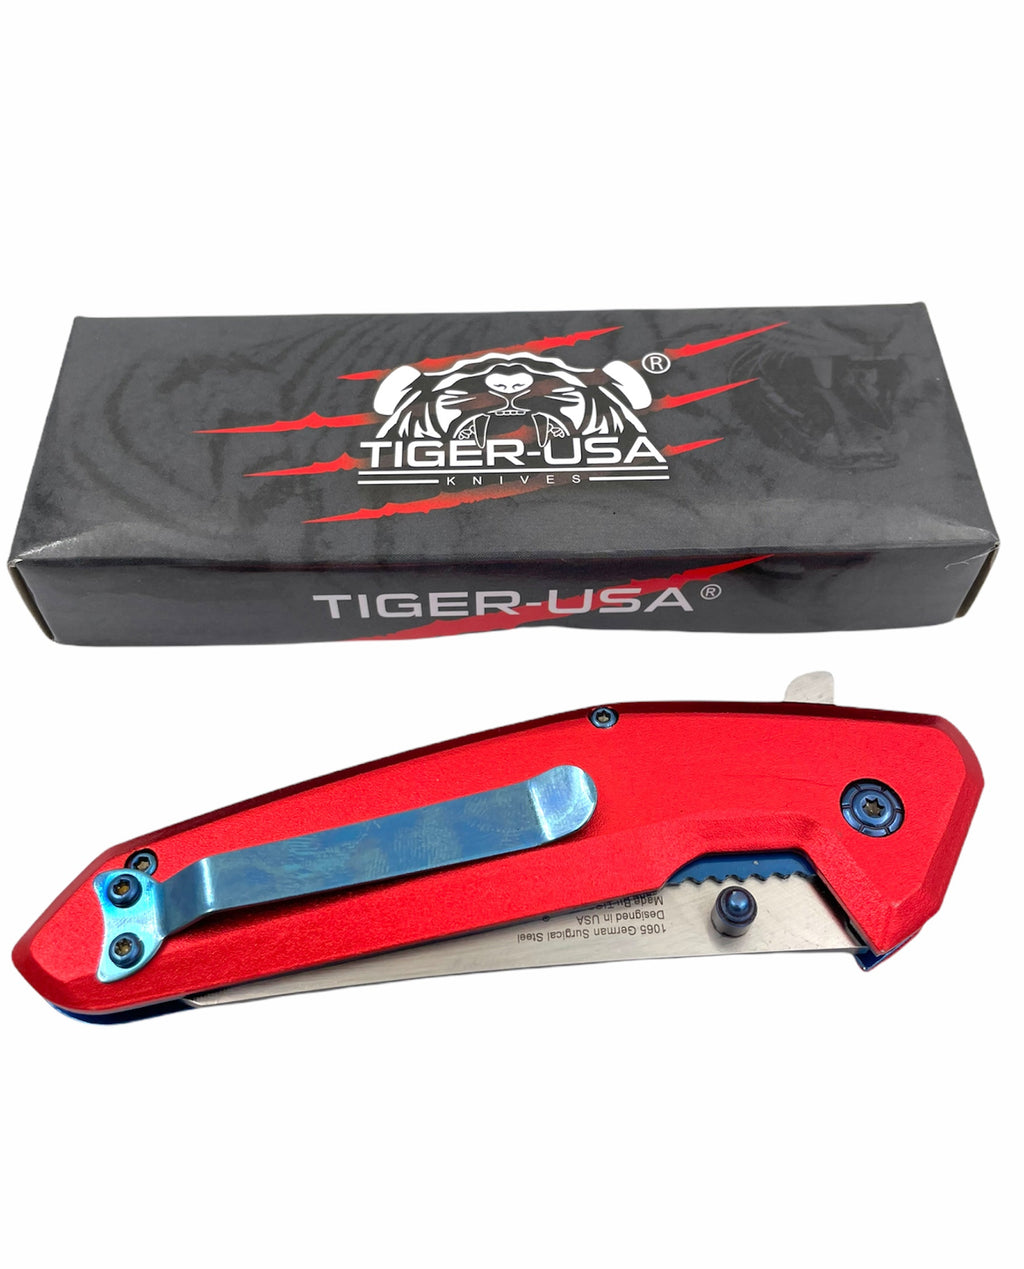 Tiger USA Spring Action Red Folding knife tanto